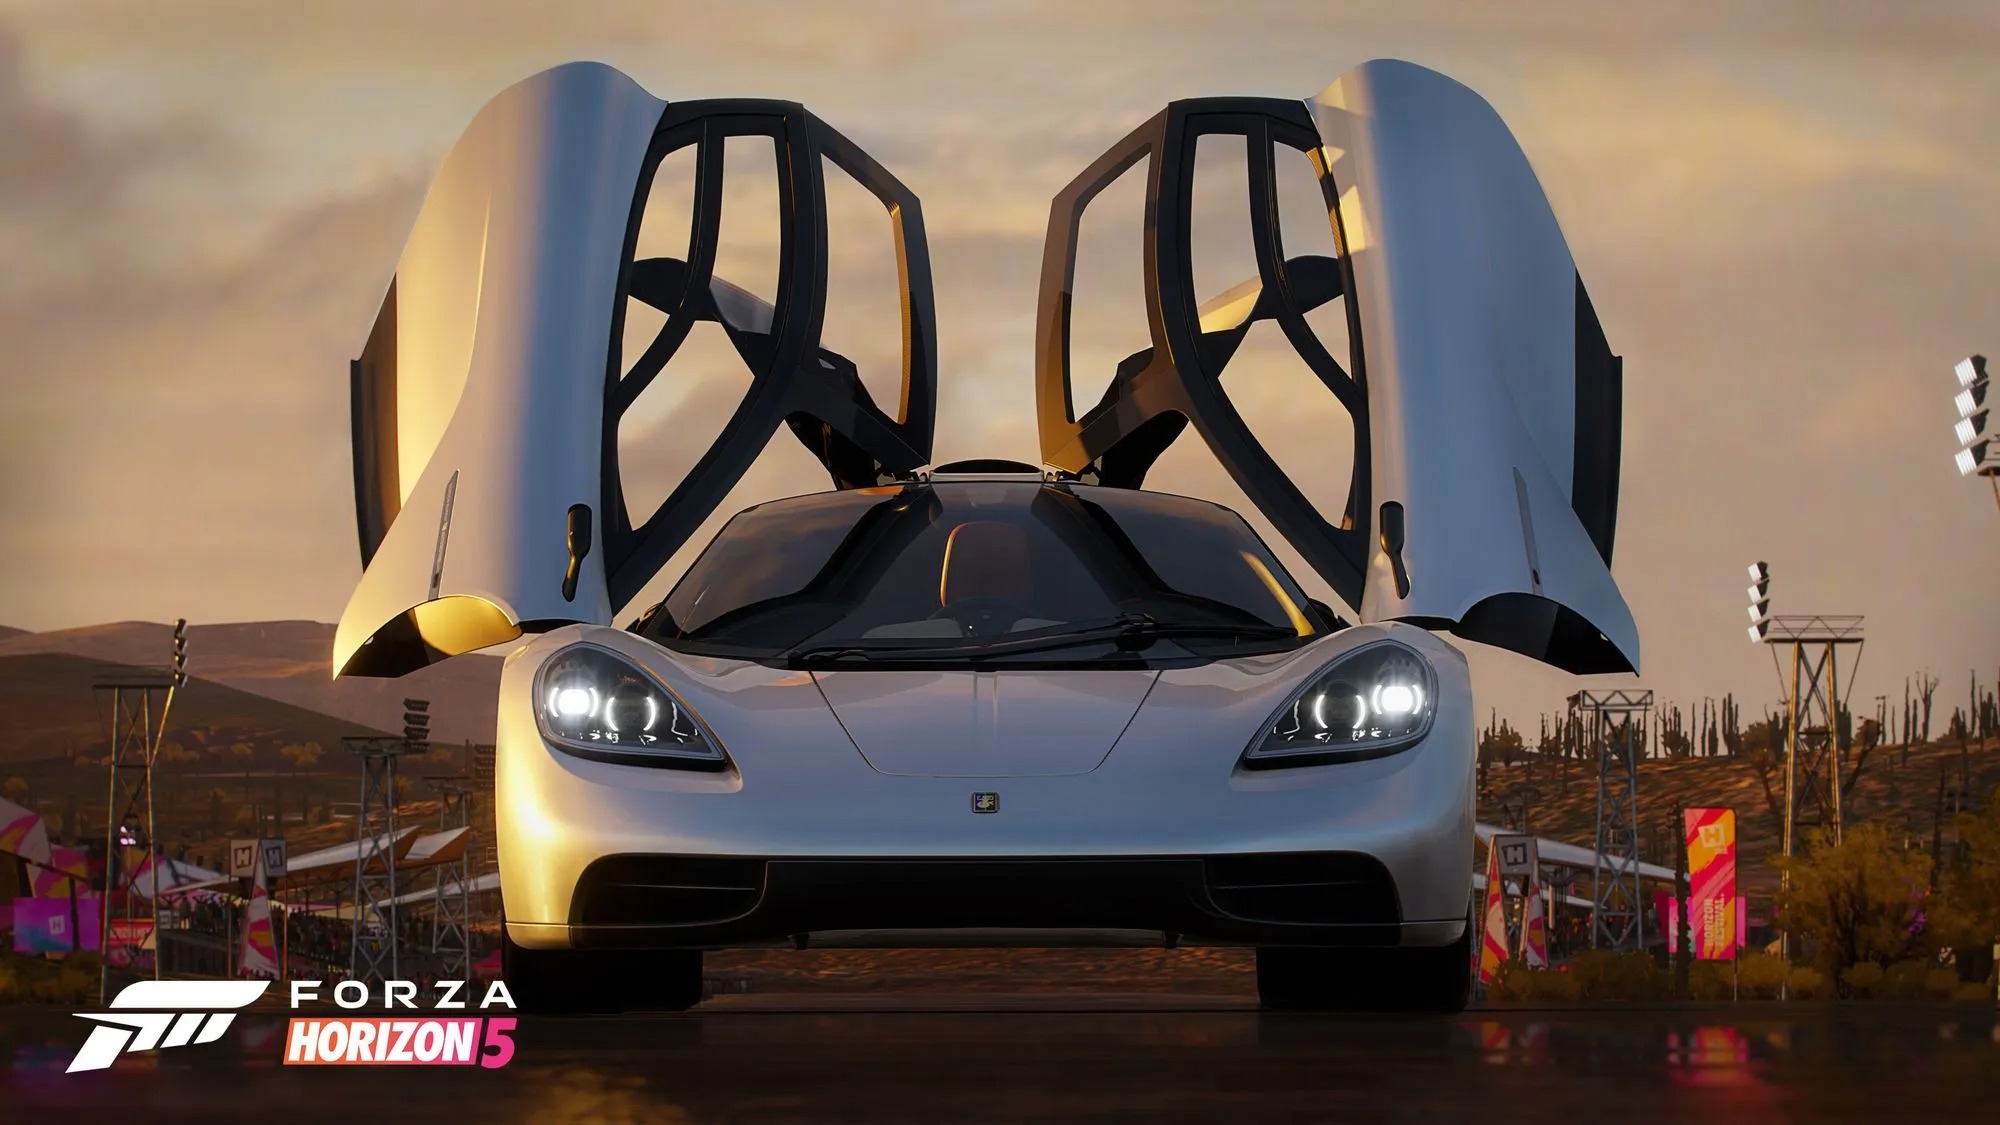 Forza Horizon 5 ‘Winter Wonderland’ brings back Secret Santa and adds 23 new cars (including from Fast and Furious)